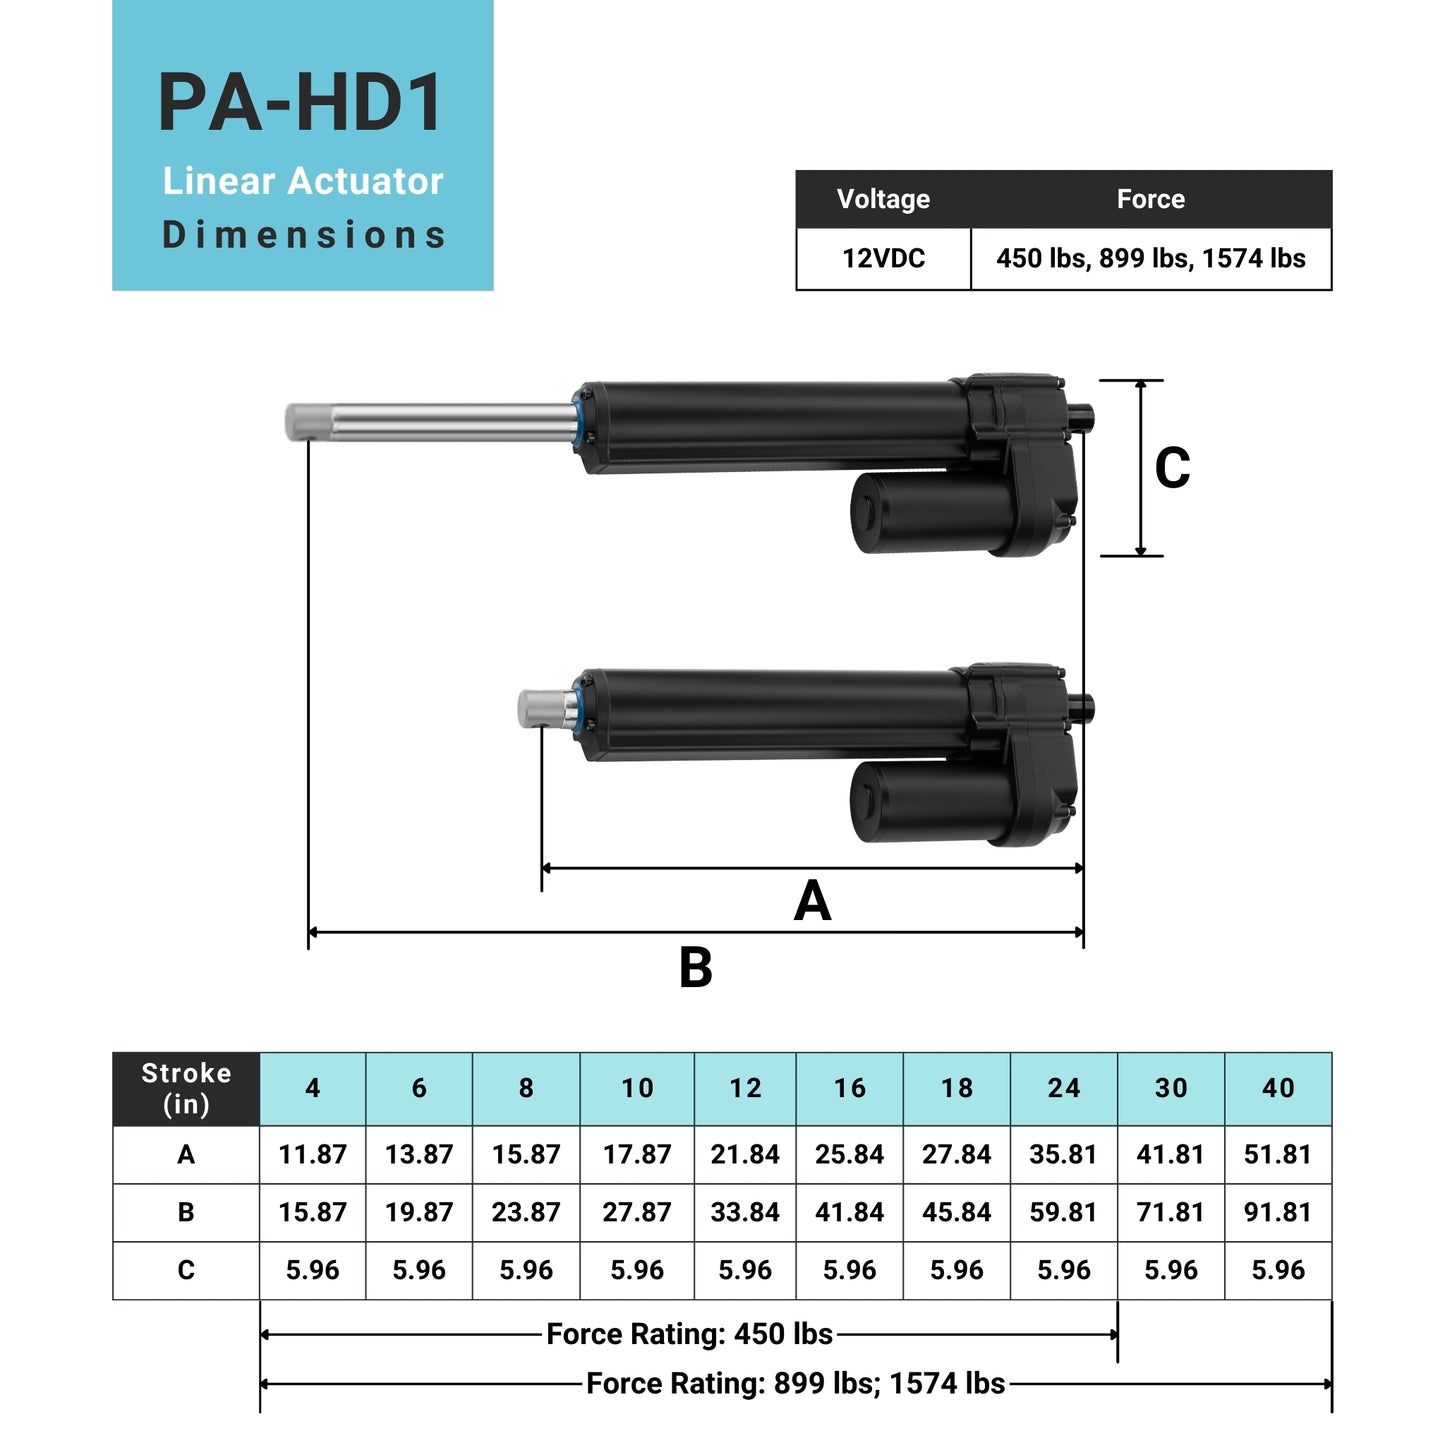 PA-HD1 12VDC 450; 899; 1574lbs dimensions in inches